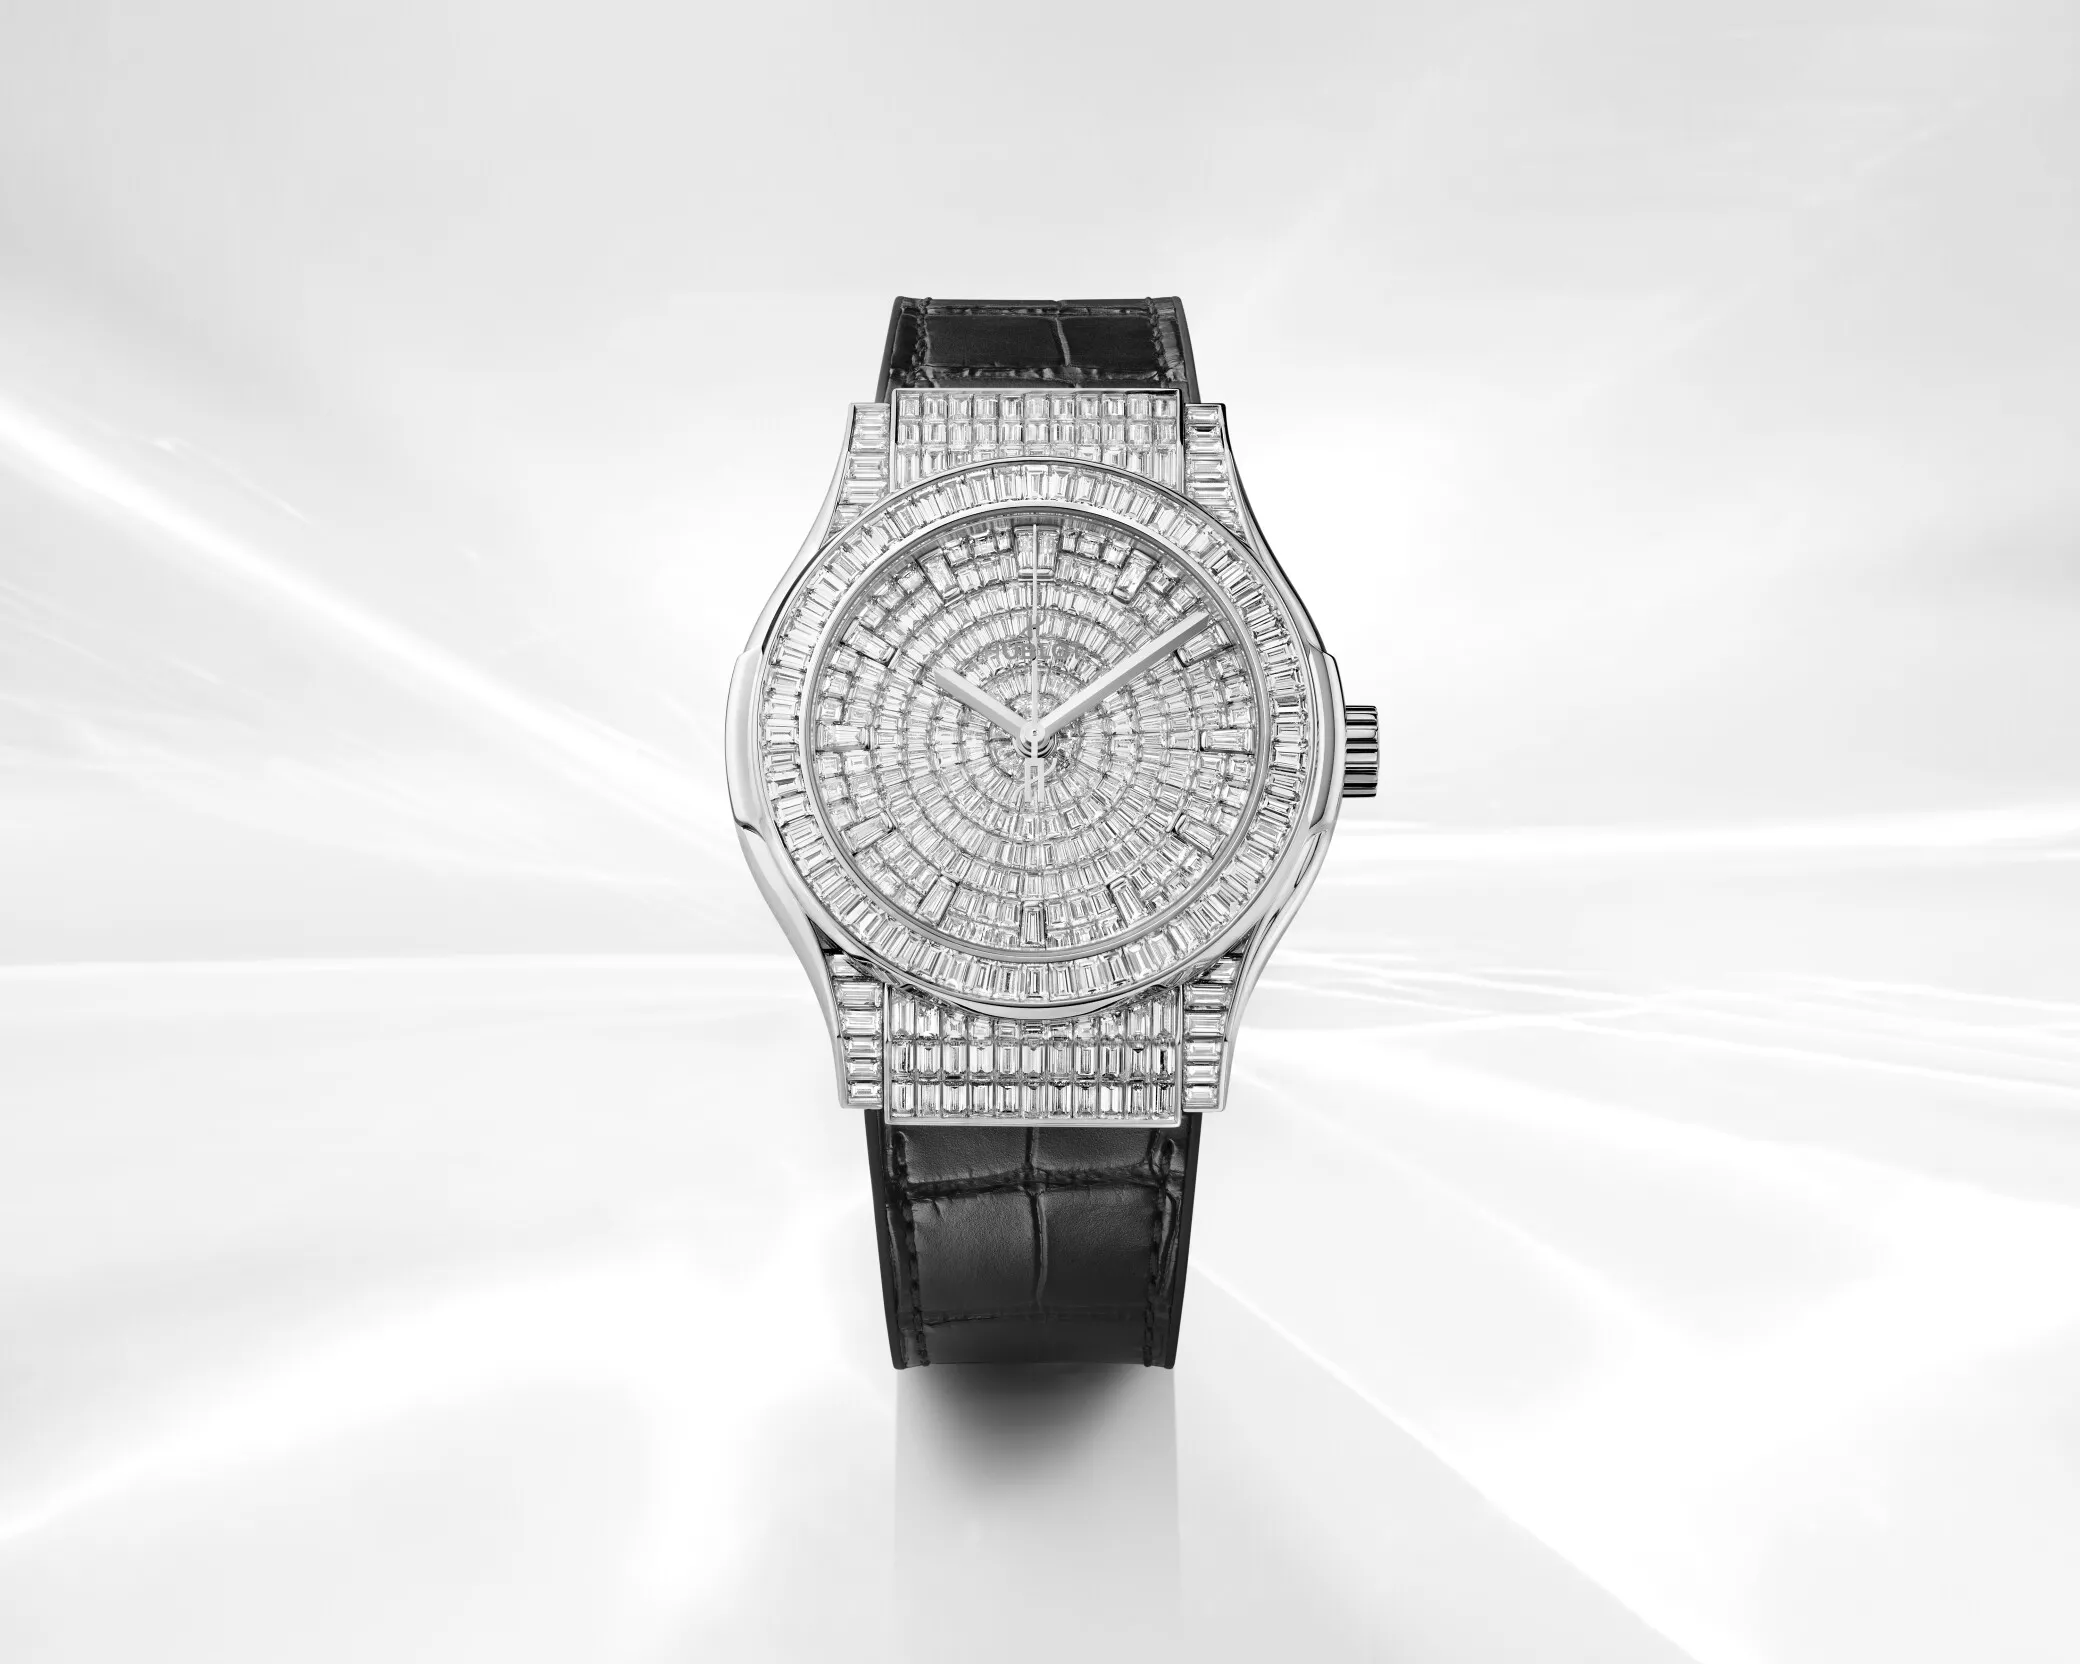 Hublot combines iconic design and craftsmanship with its Classic Fusion High Jewellery 2023 watch